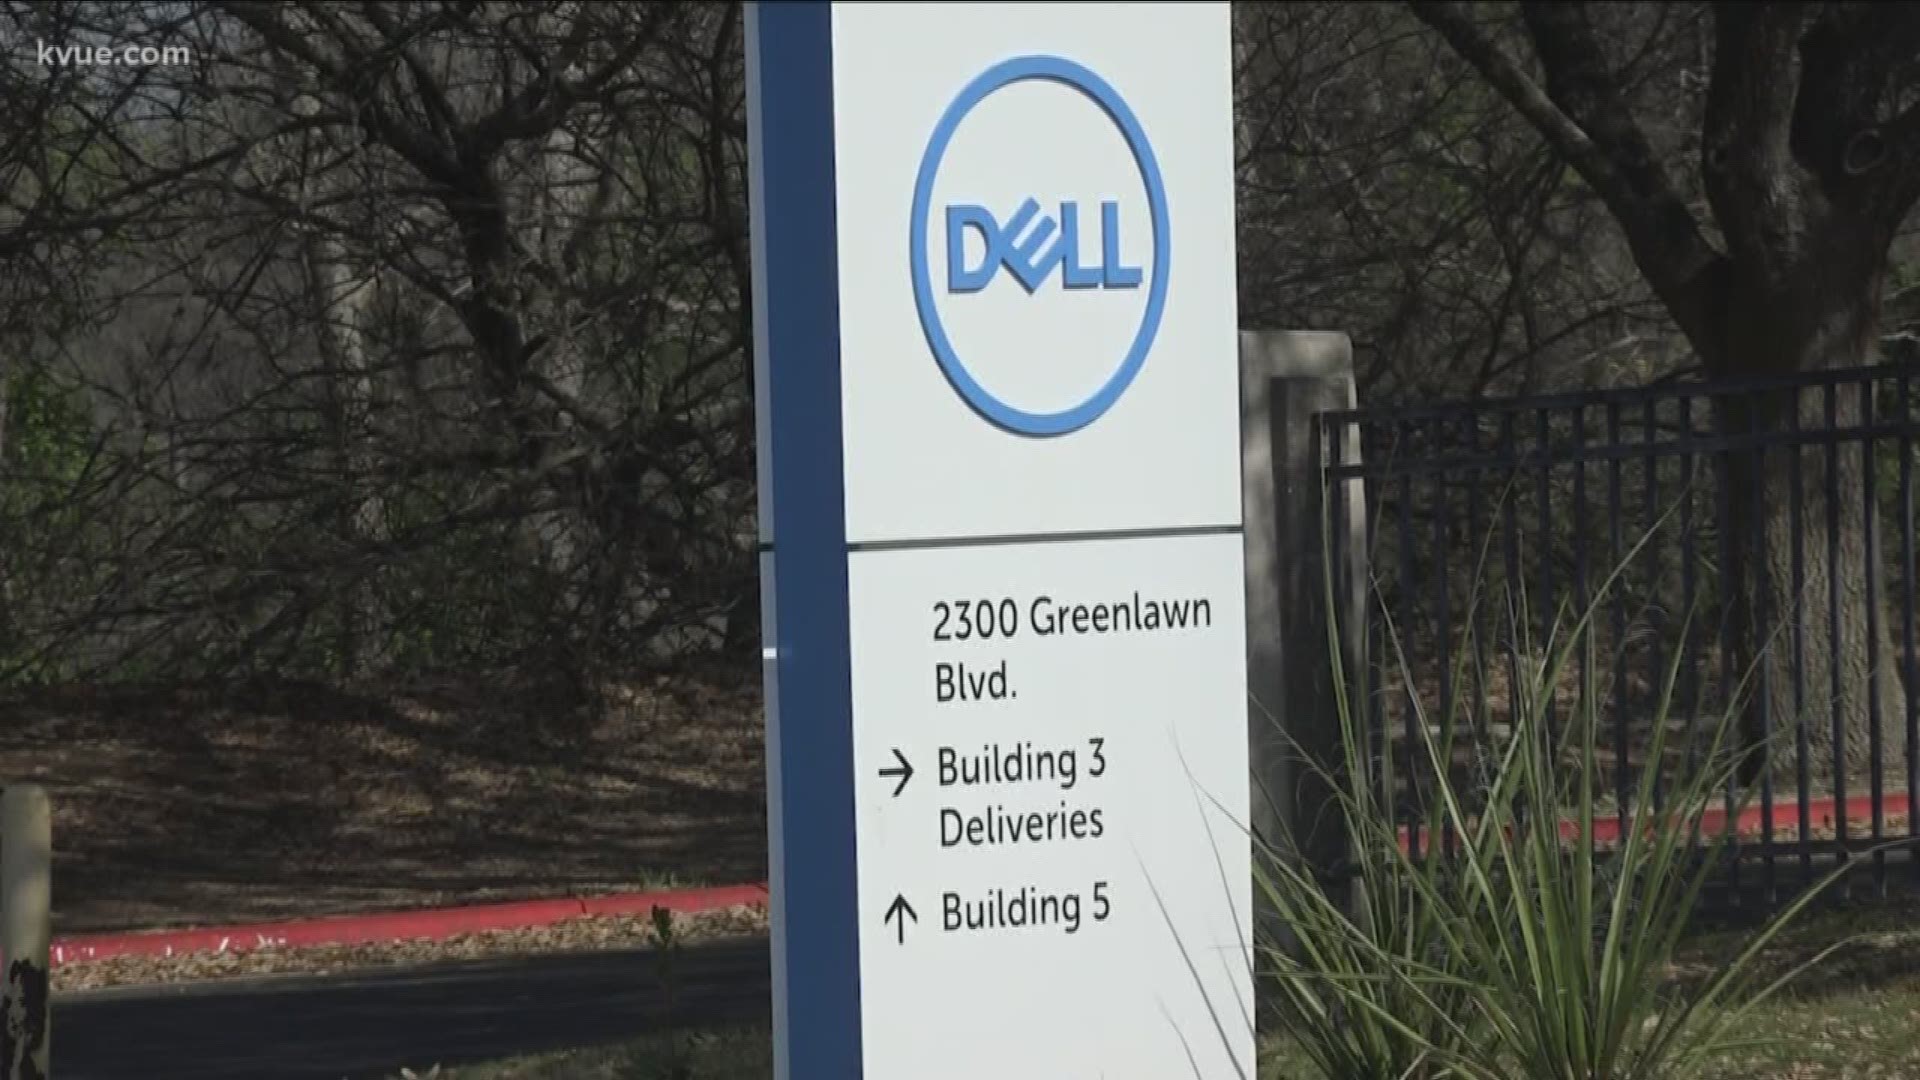 Many of Dell's employees are working from now due to coronavirus concerns, and it's having its impacts.